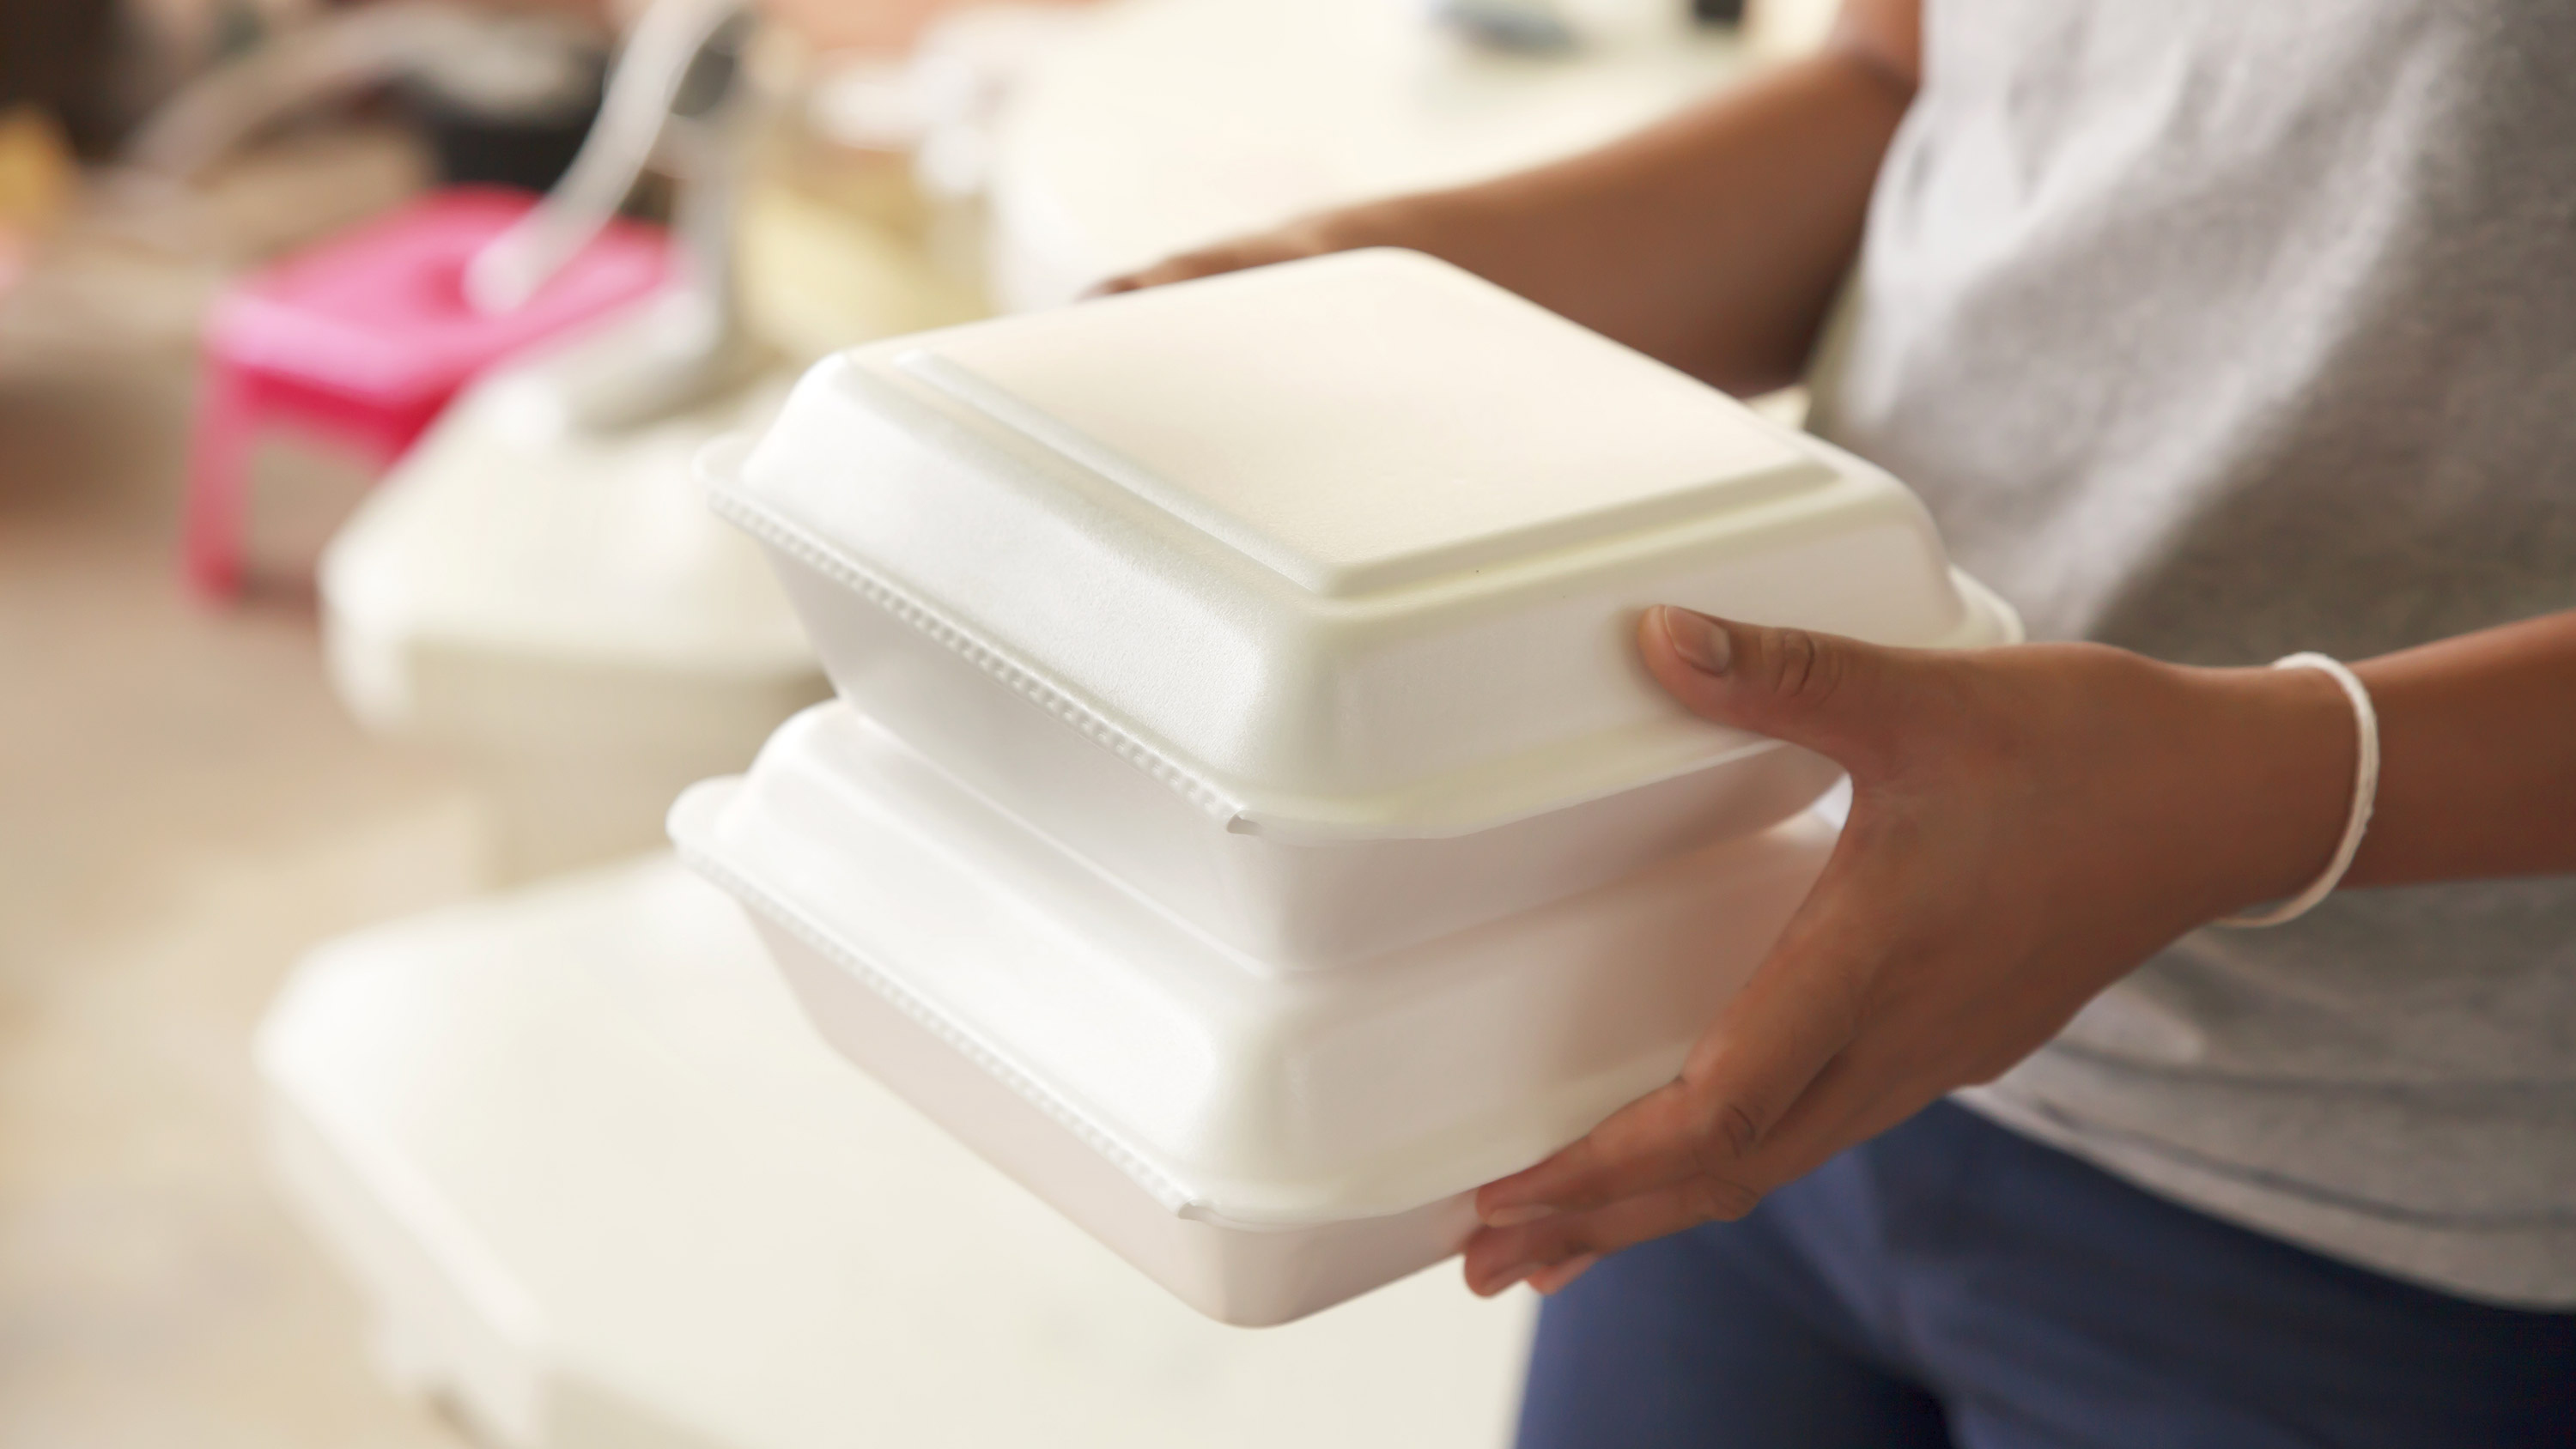 Maine becomes the first state to ban styrofoam | CNN